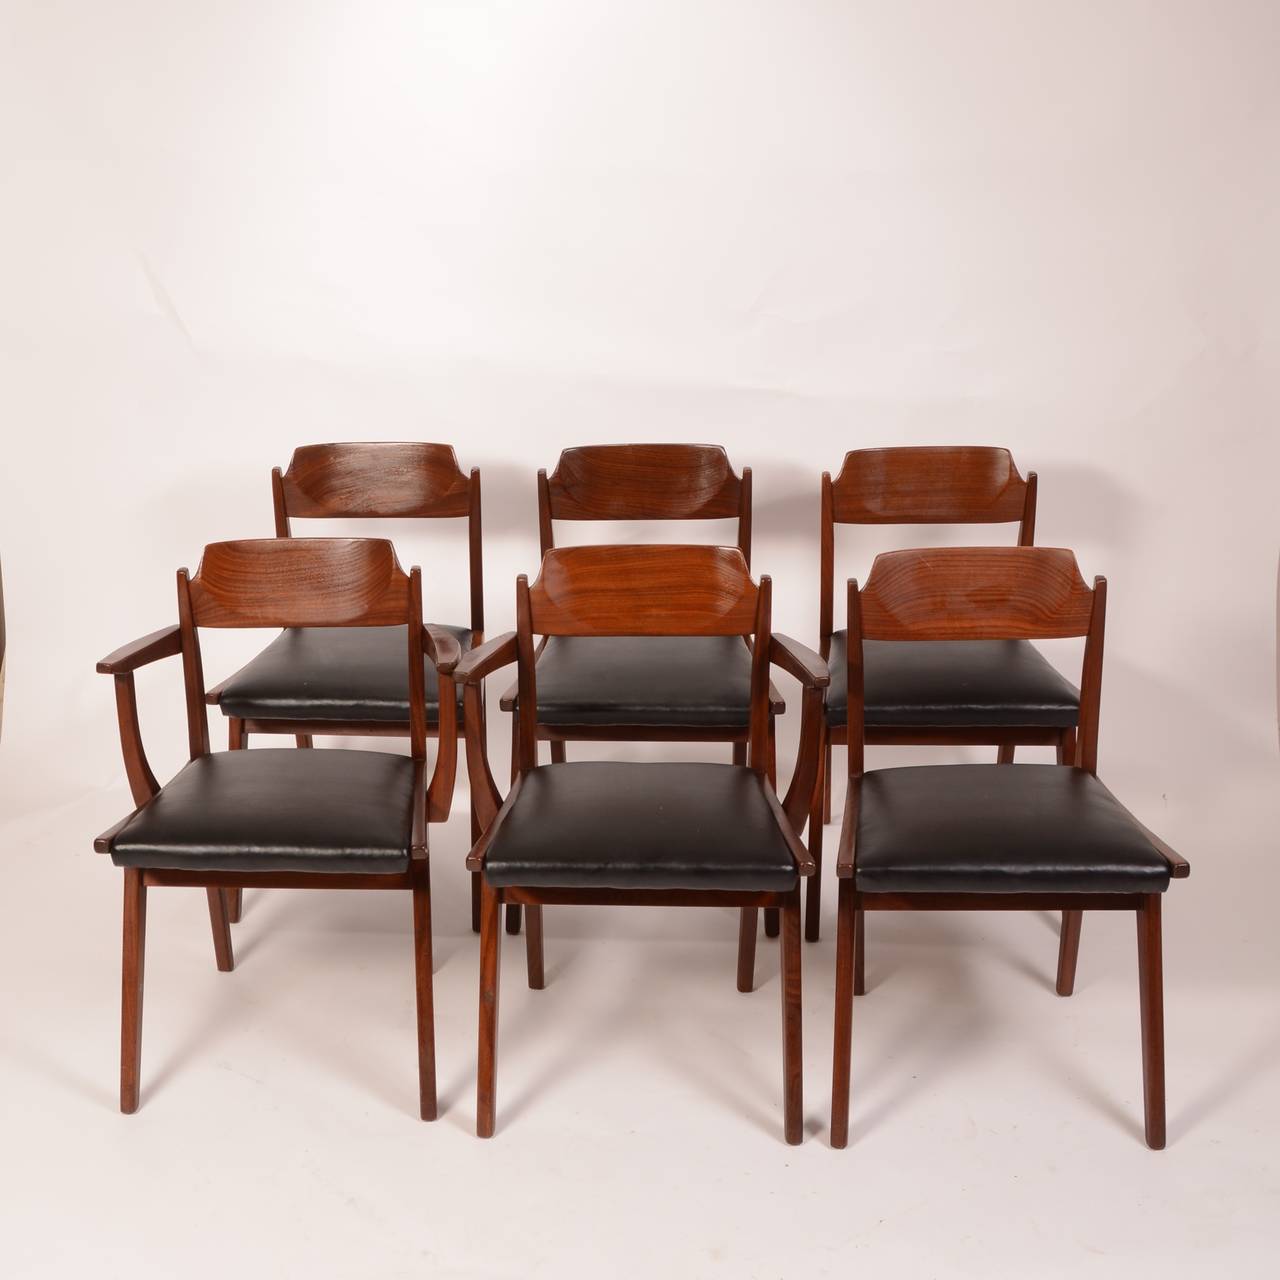 A set of 5 dining chairs designed by Jan Kuypers for Imperial. The set includes one captain chair (there are 2 pictured).
 
 